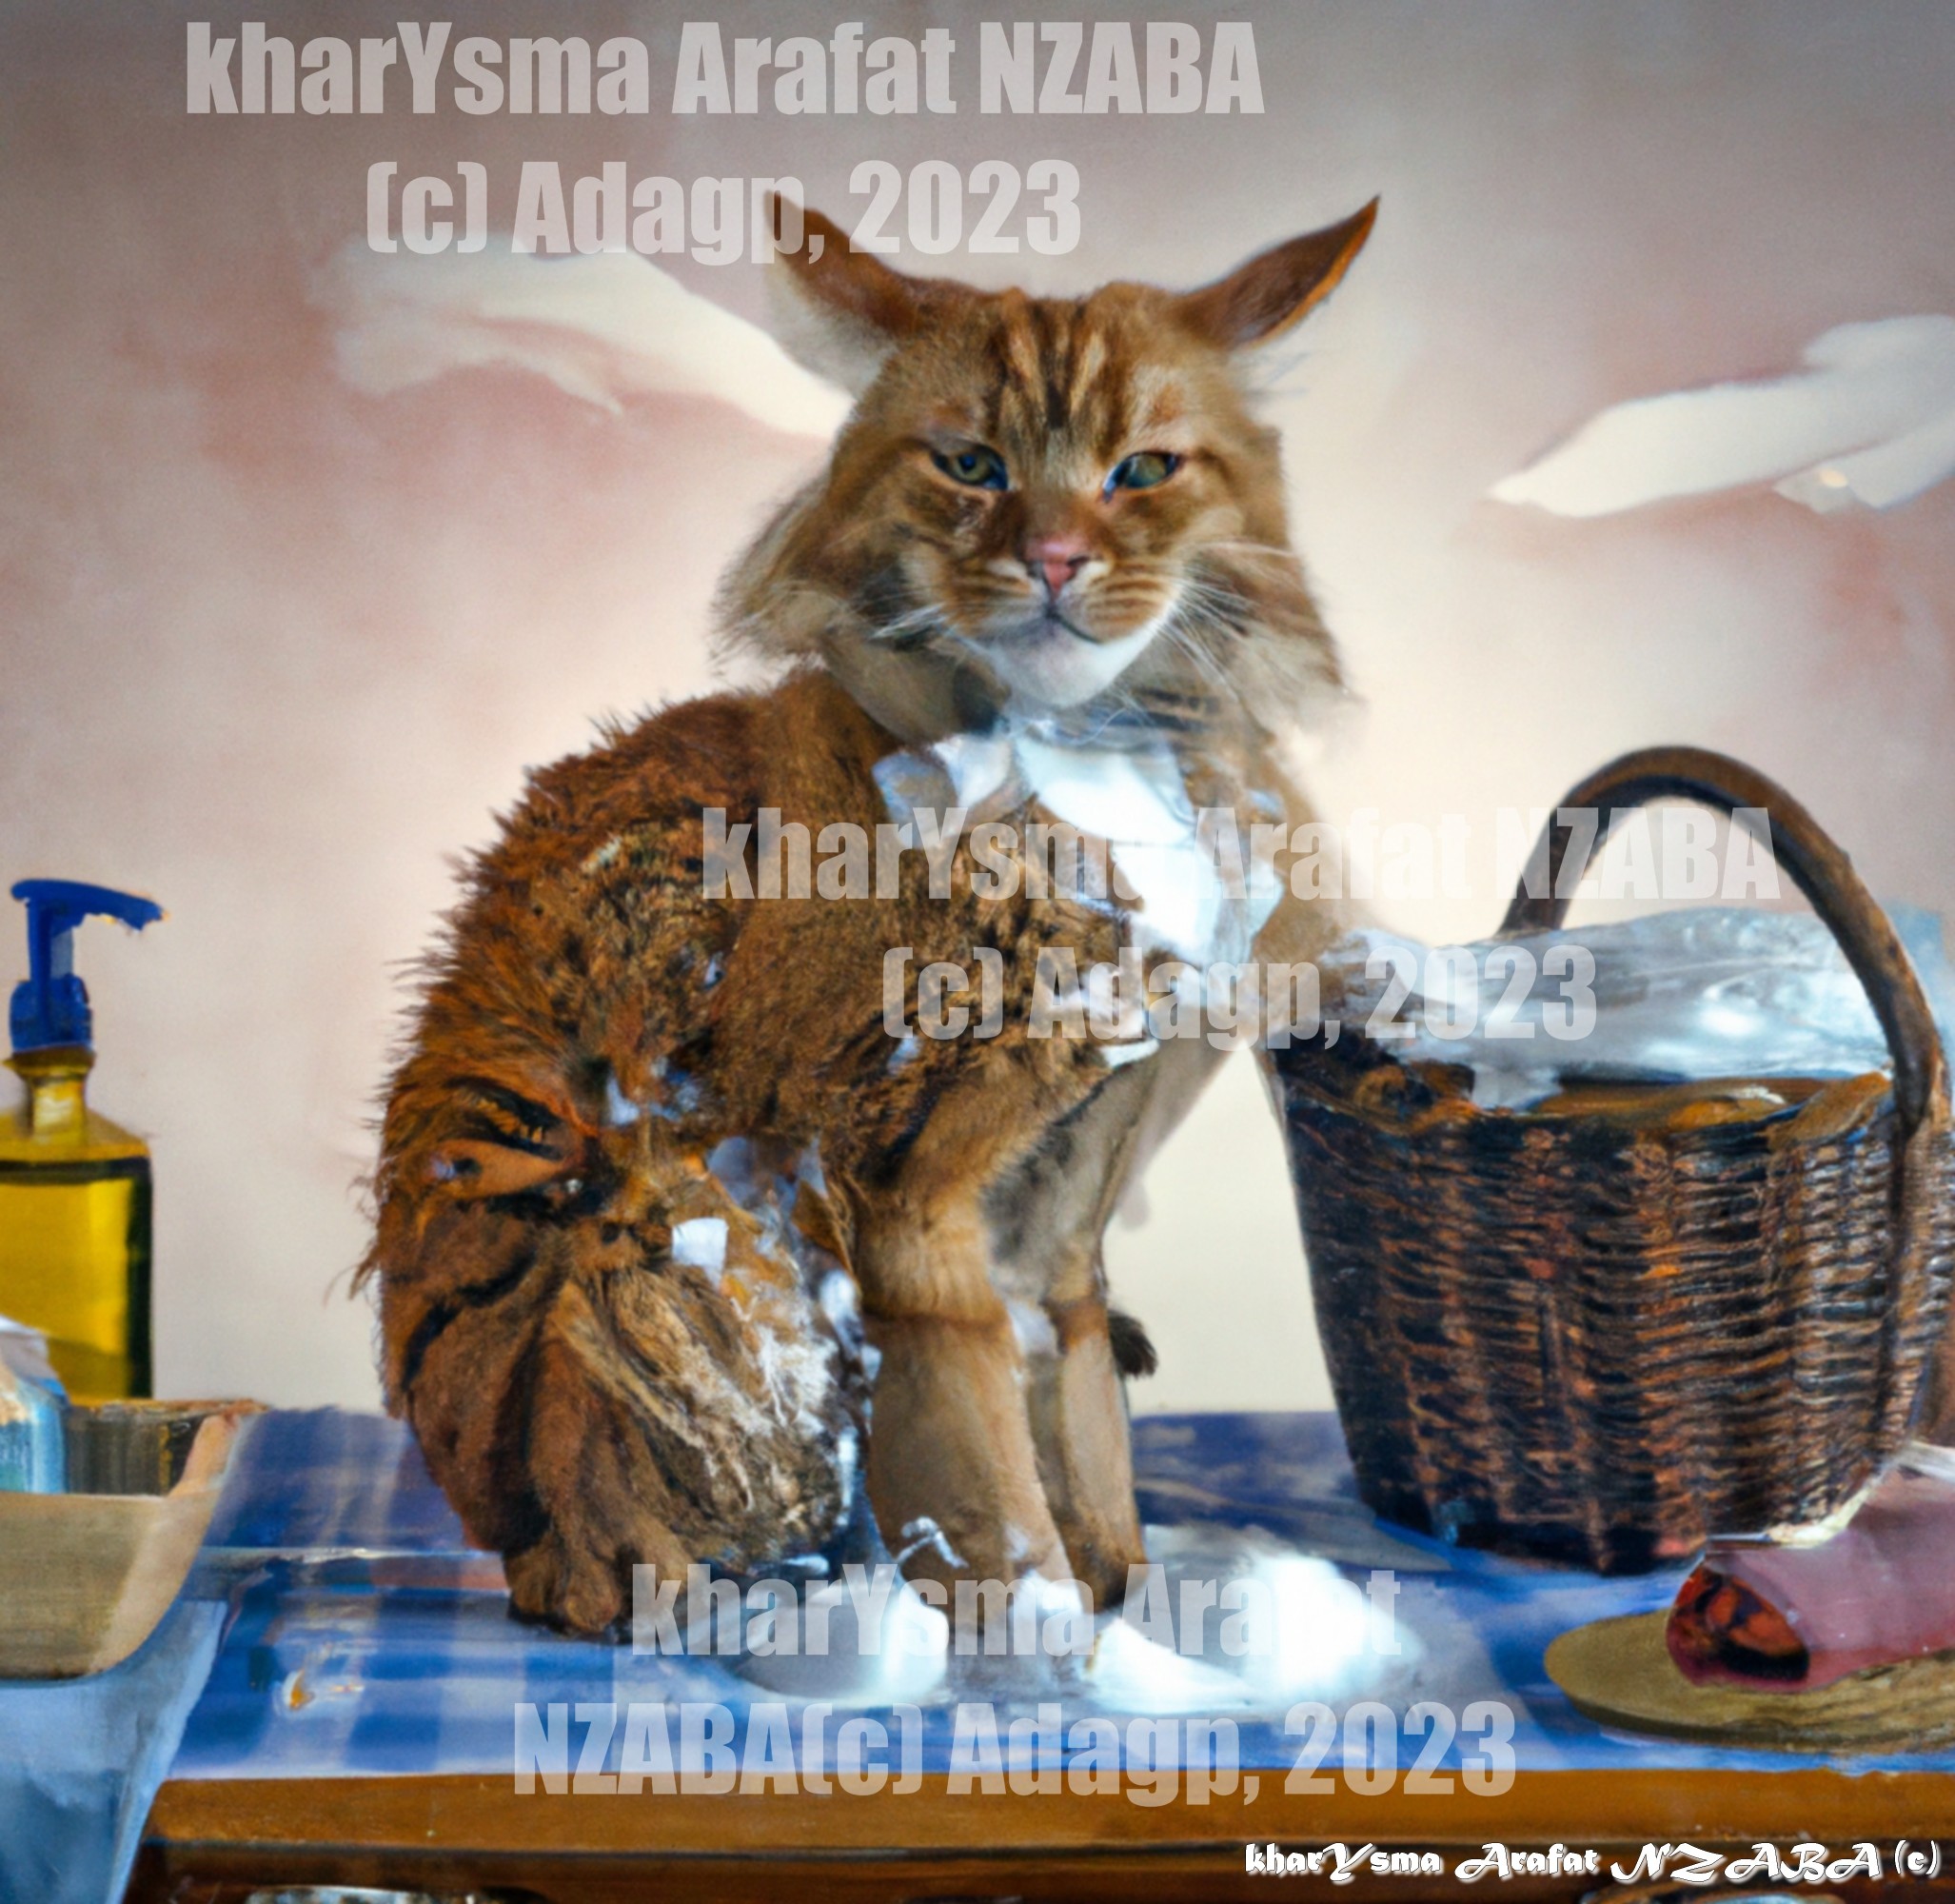 Le chat nerveux by NZABA Arafat.jpg